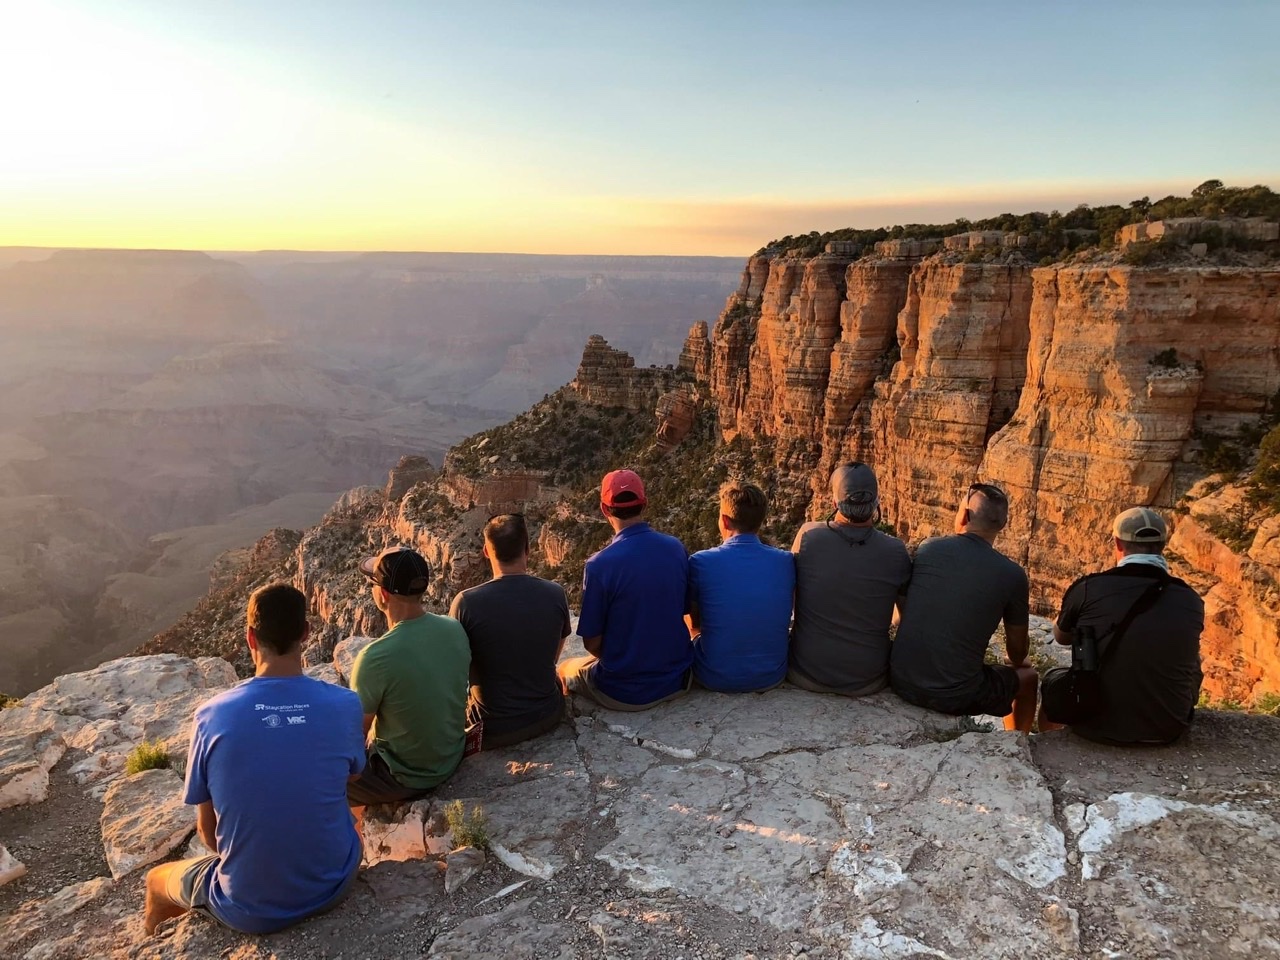 8 men sit on rock overlooking the edge of the Grand Canyon at sunset